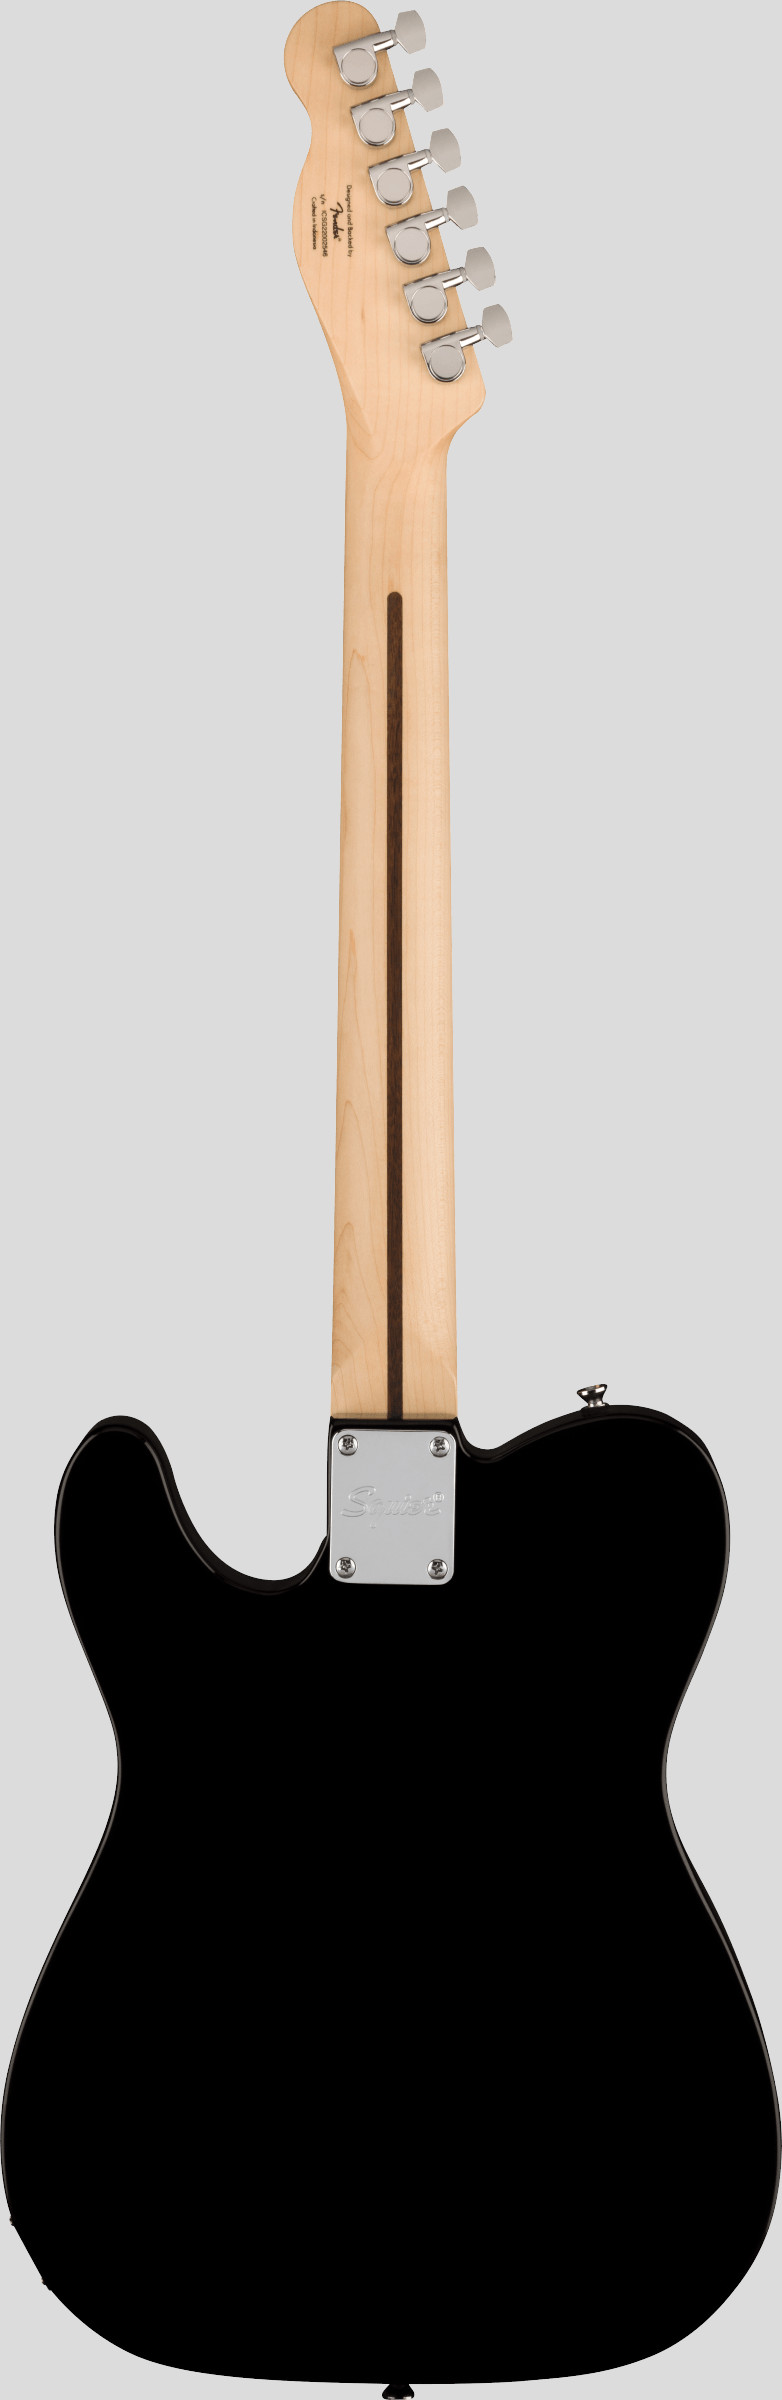 Squier by Fender Sonic Telecaster Black 2